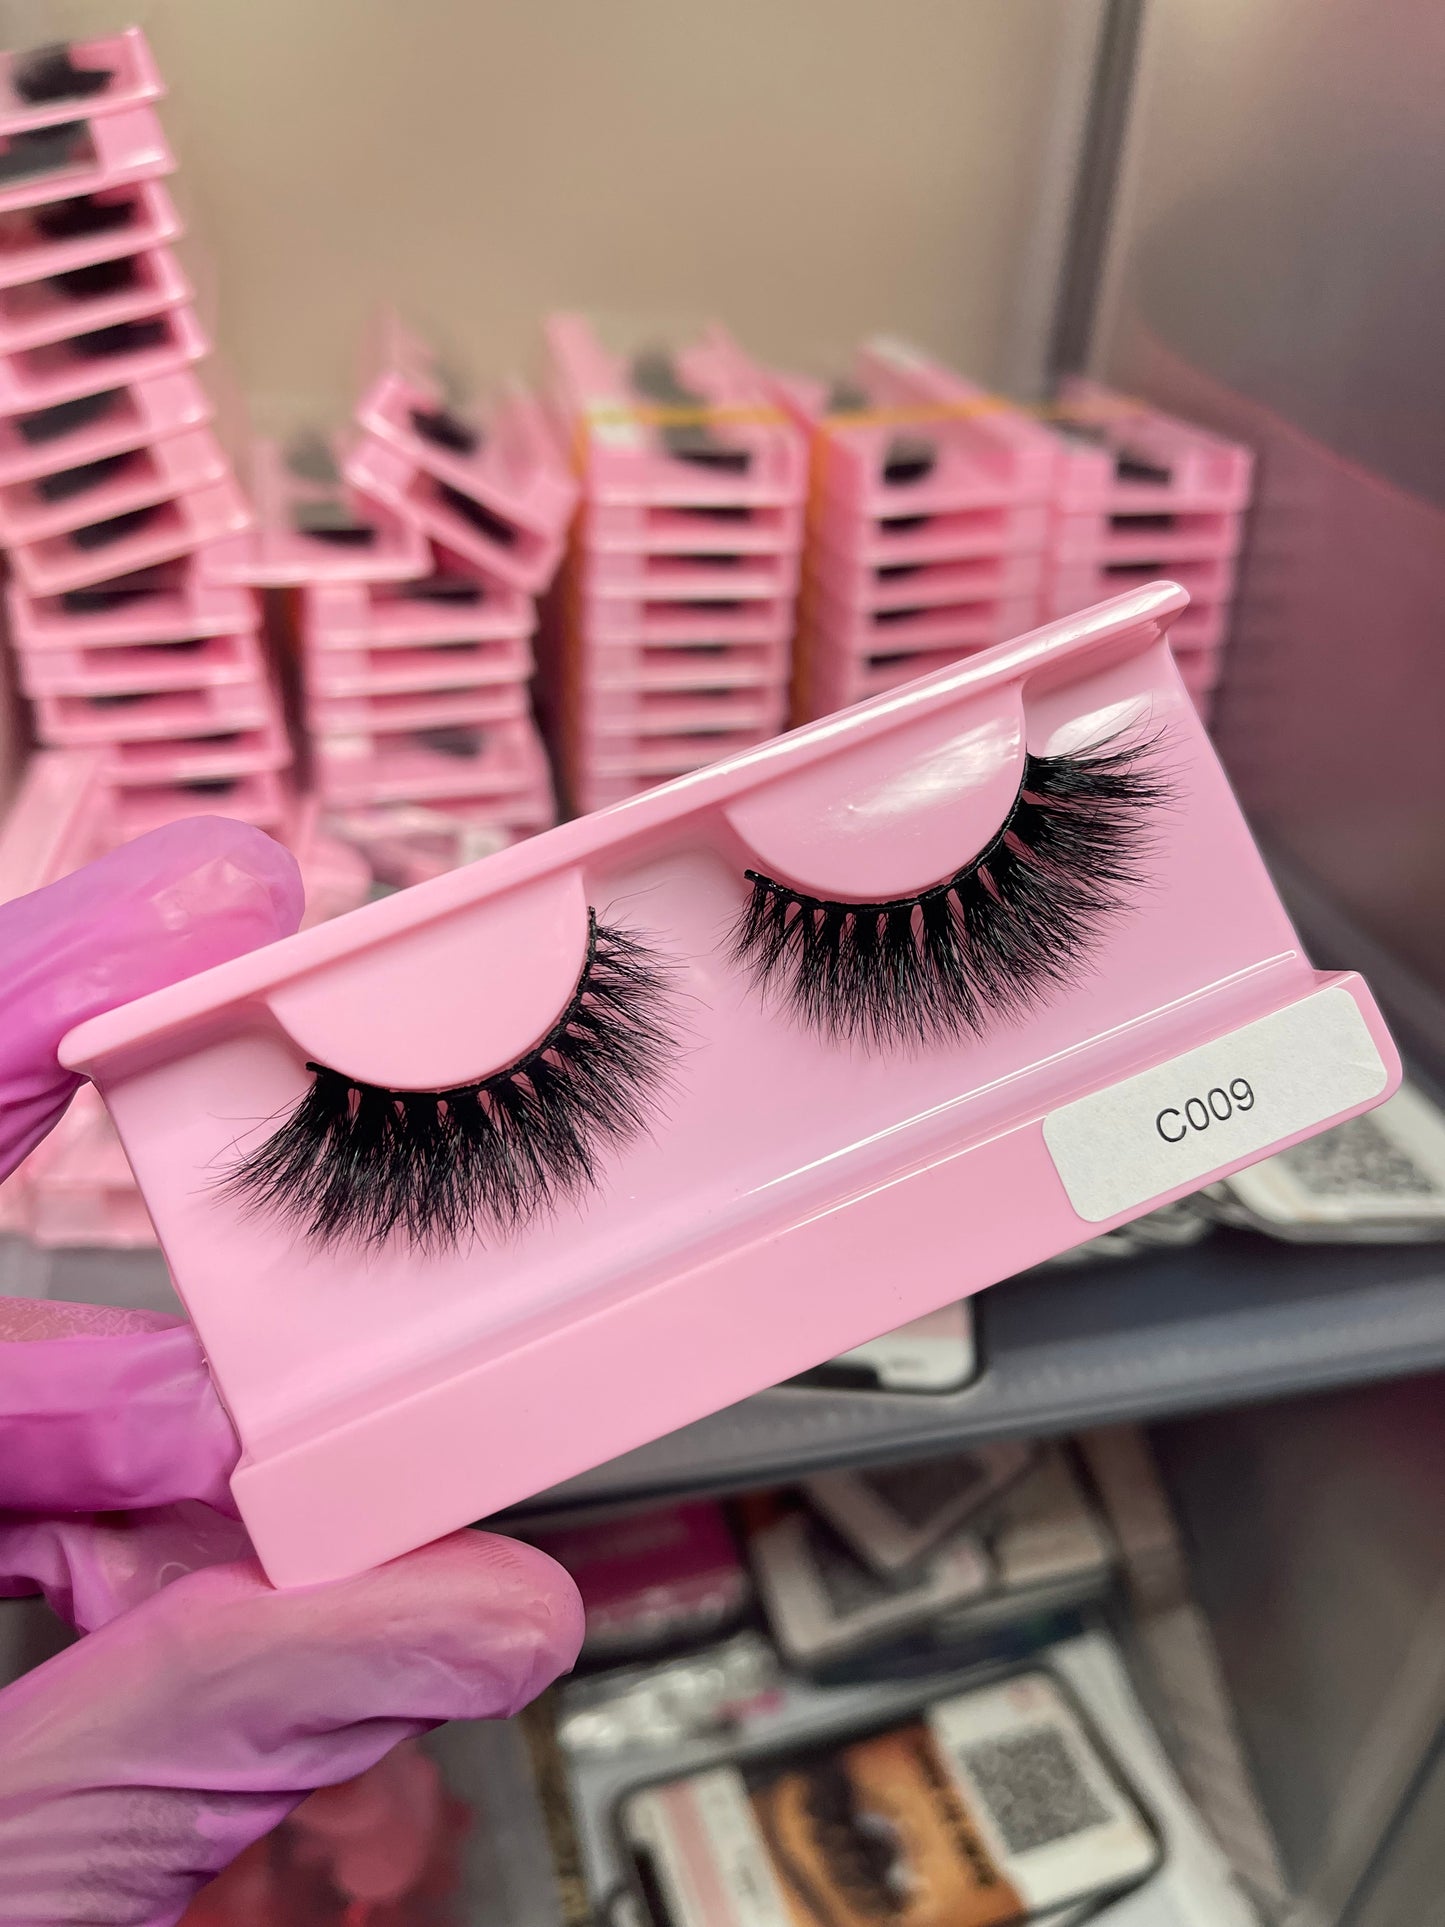 Gentle Glamour: C009 Embrace Your Natural Lashes with Style Achieve the Look of Real Mink